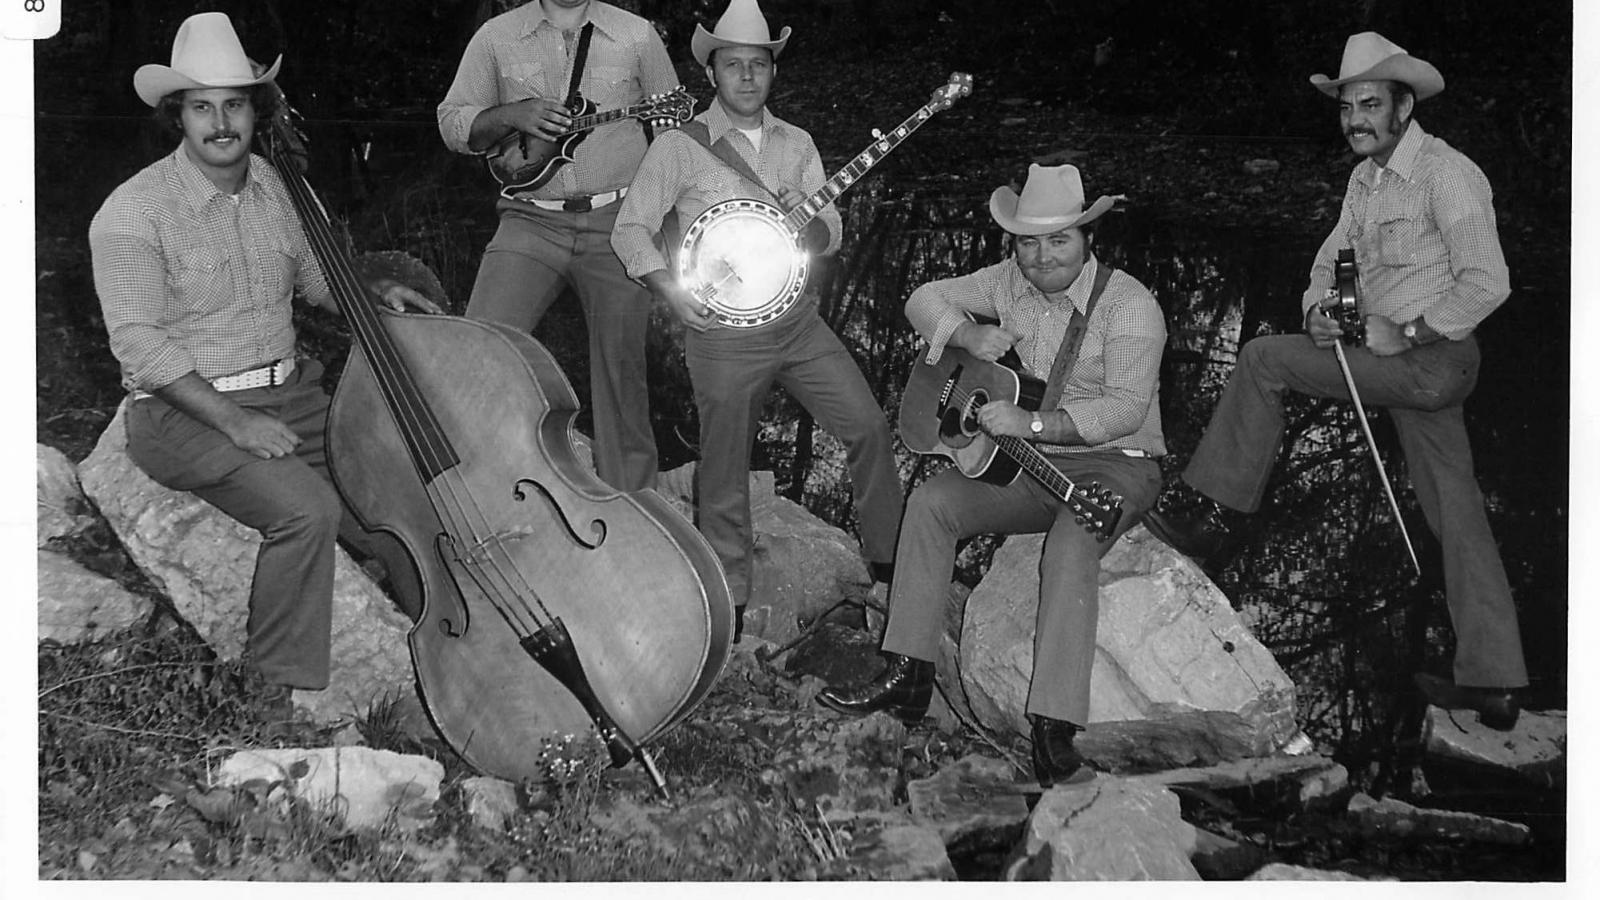 The Paradise Valley Boys, a bluegrass band based in Waverly, Ohio.